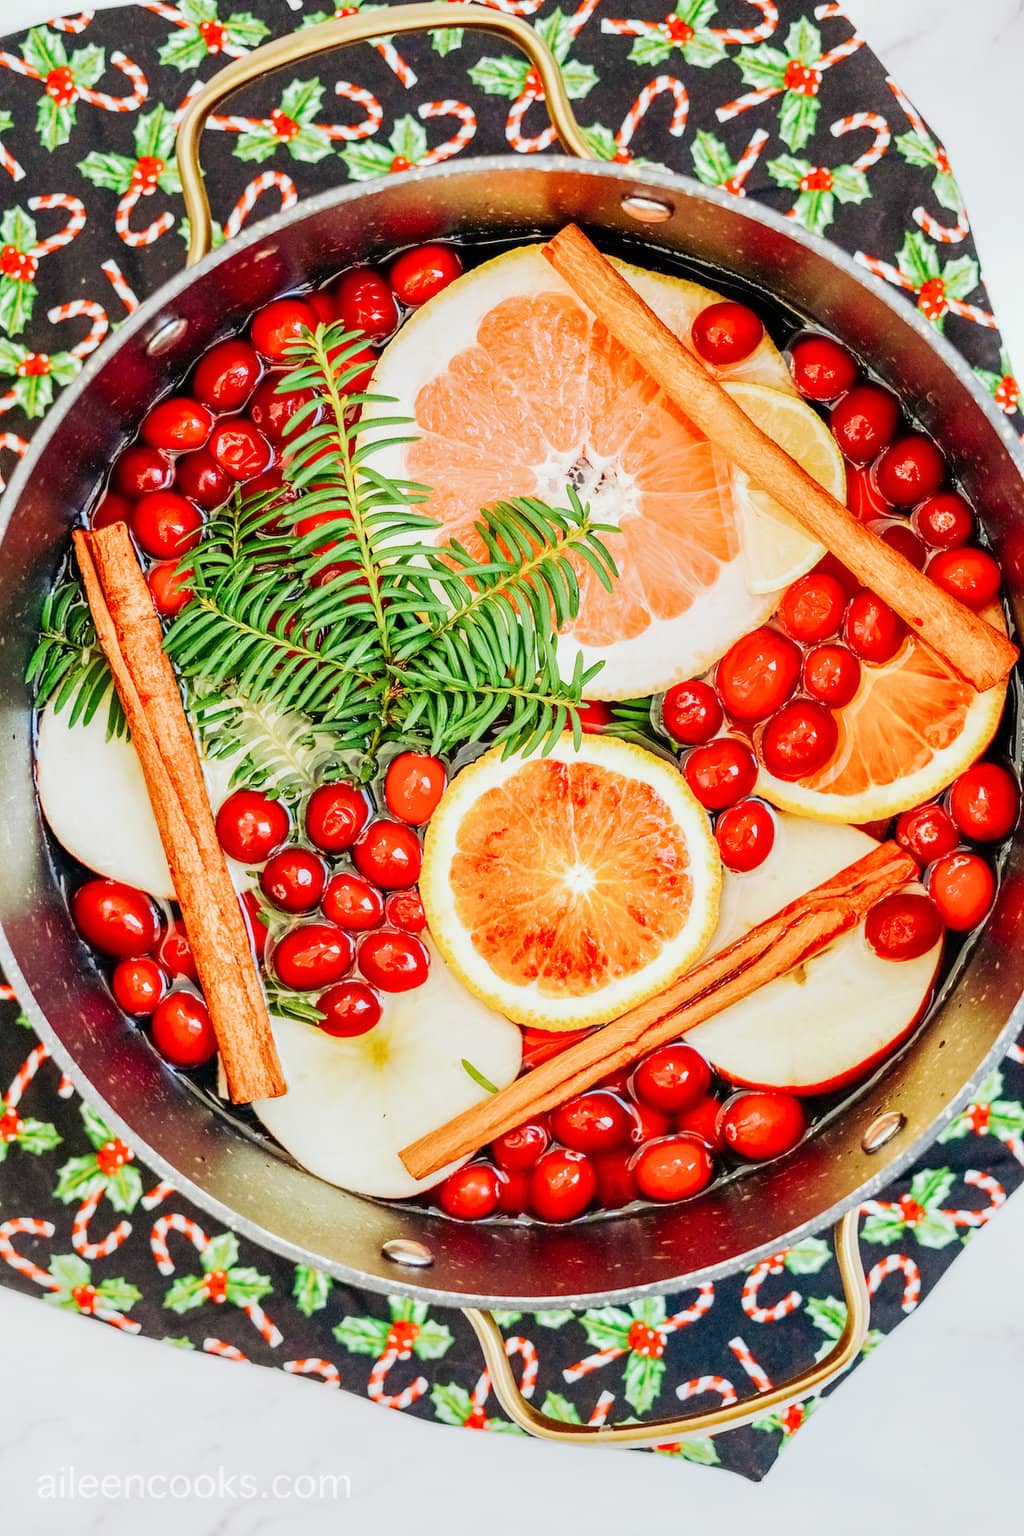 Bird’s eye view of a Christmas simmer pot, filled with ingredients like cinnamon sticks, apples, cranberries, etc.